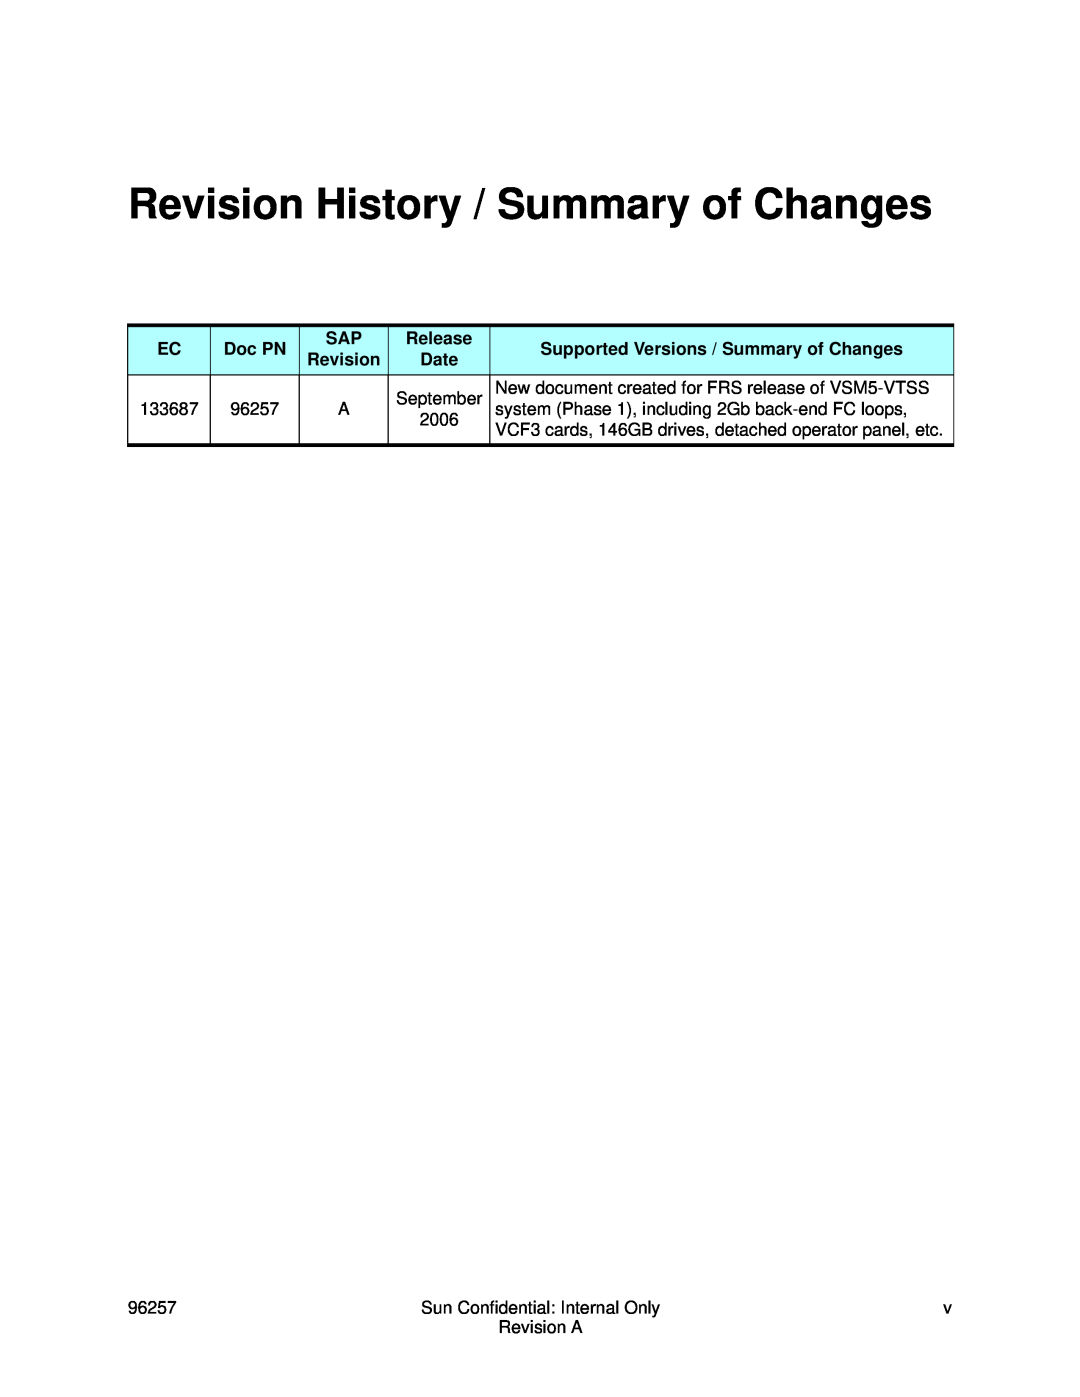 Sun Microsystems 96257 Revision History / Summary of Changes, Doc PN, Release, Supported Versions / Summary of Changes 